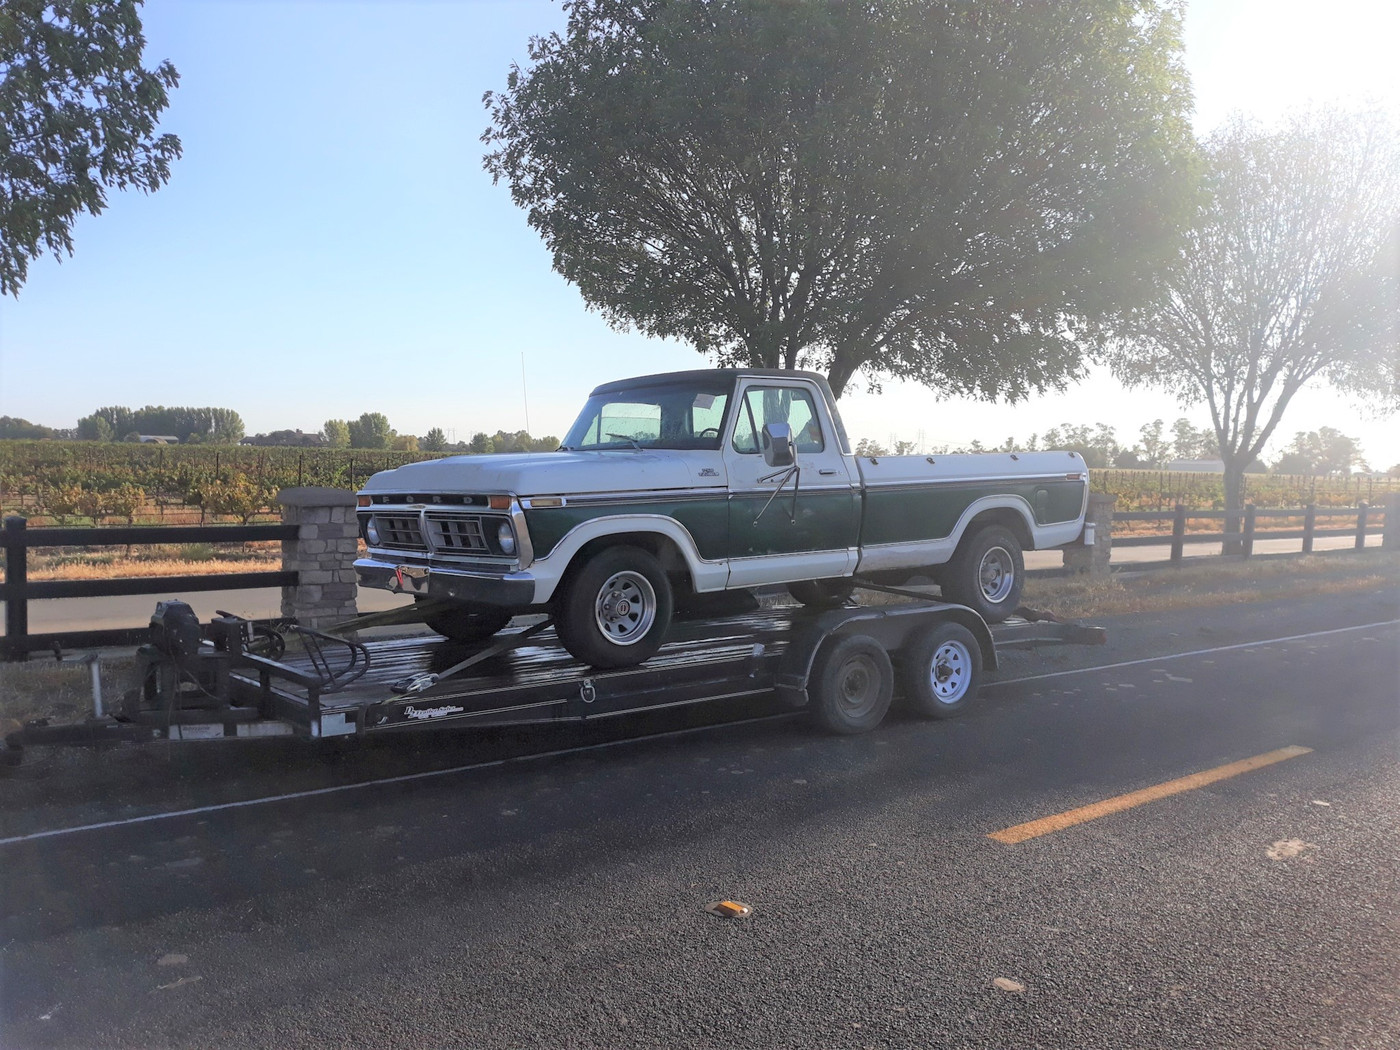 1977 Ford Ranger   Haulage to warehouse